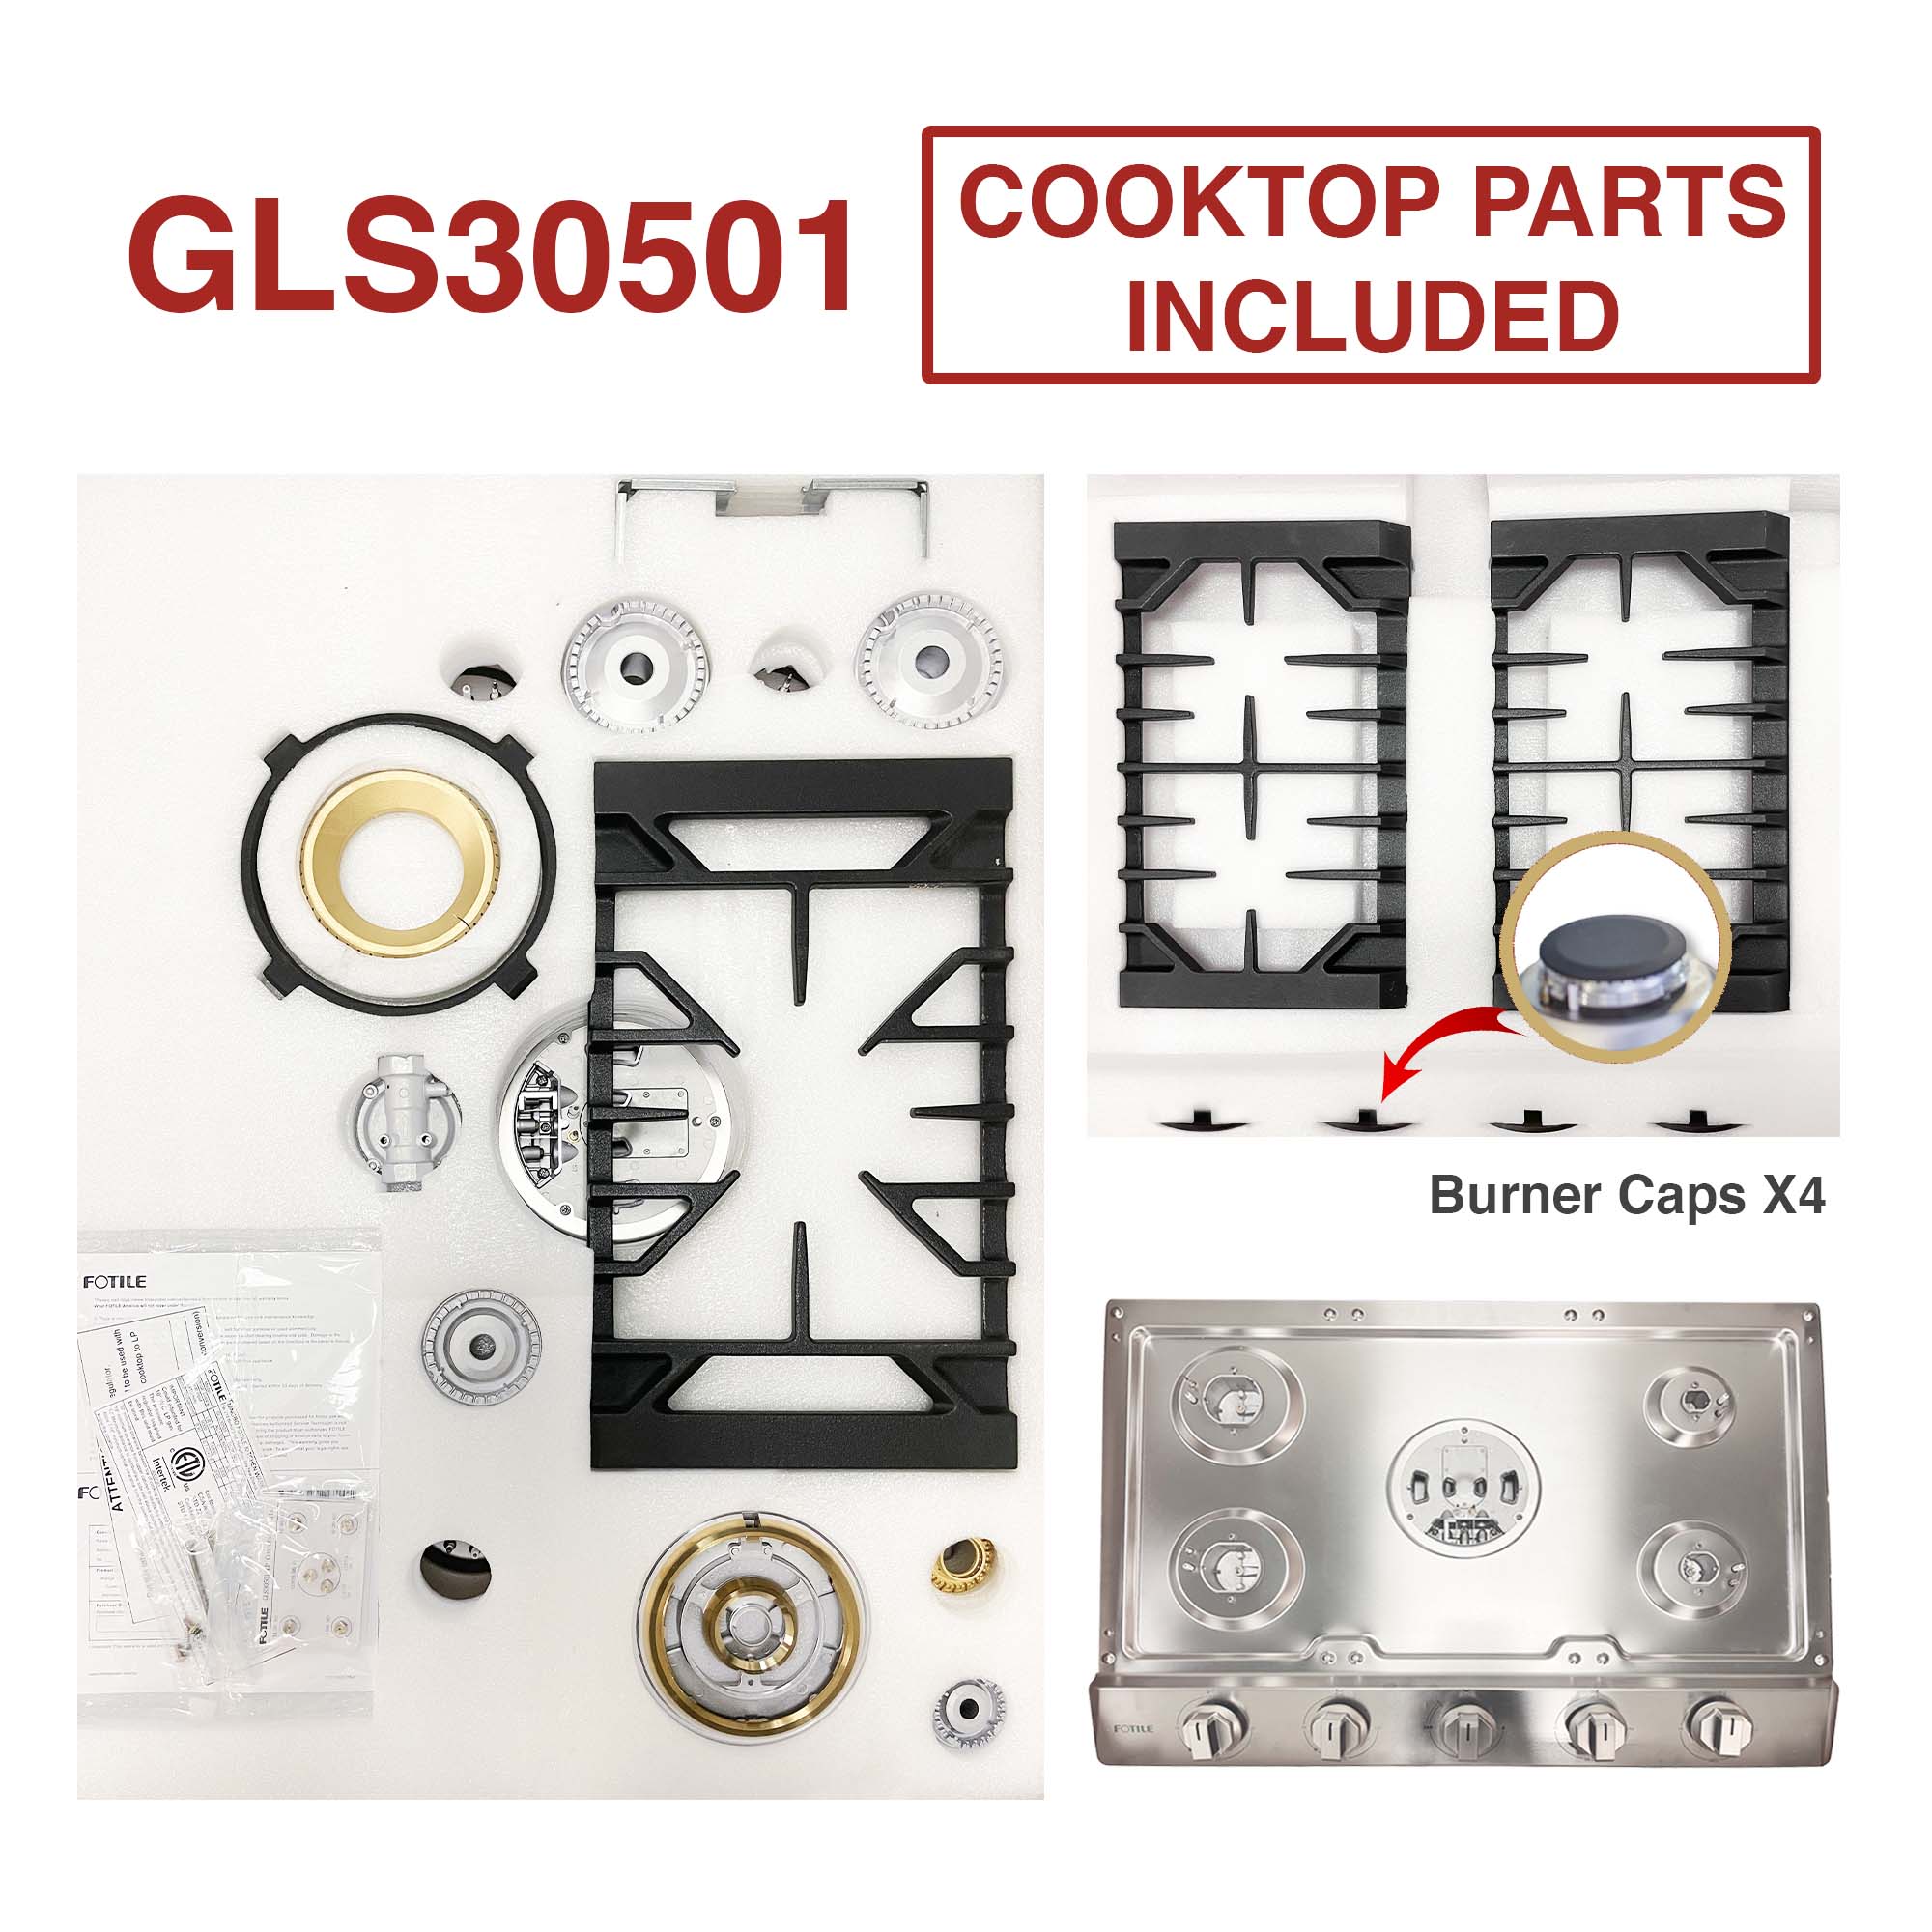 Cooktop Parts Included with the FOTILE GLS30501 Tri-Ring Gas Cooktop